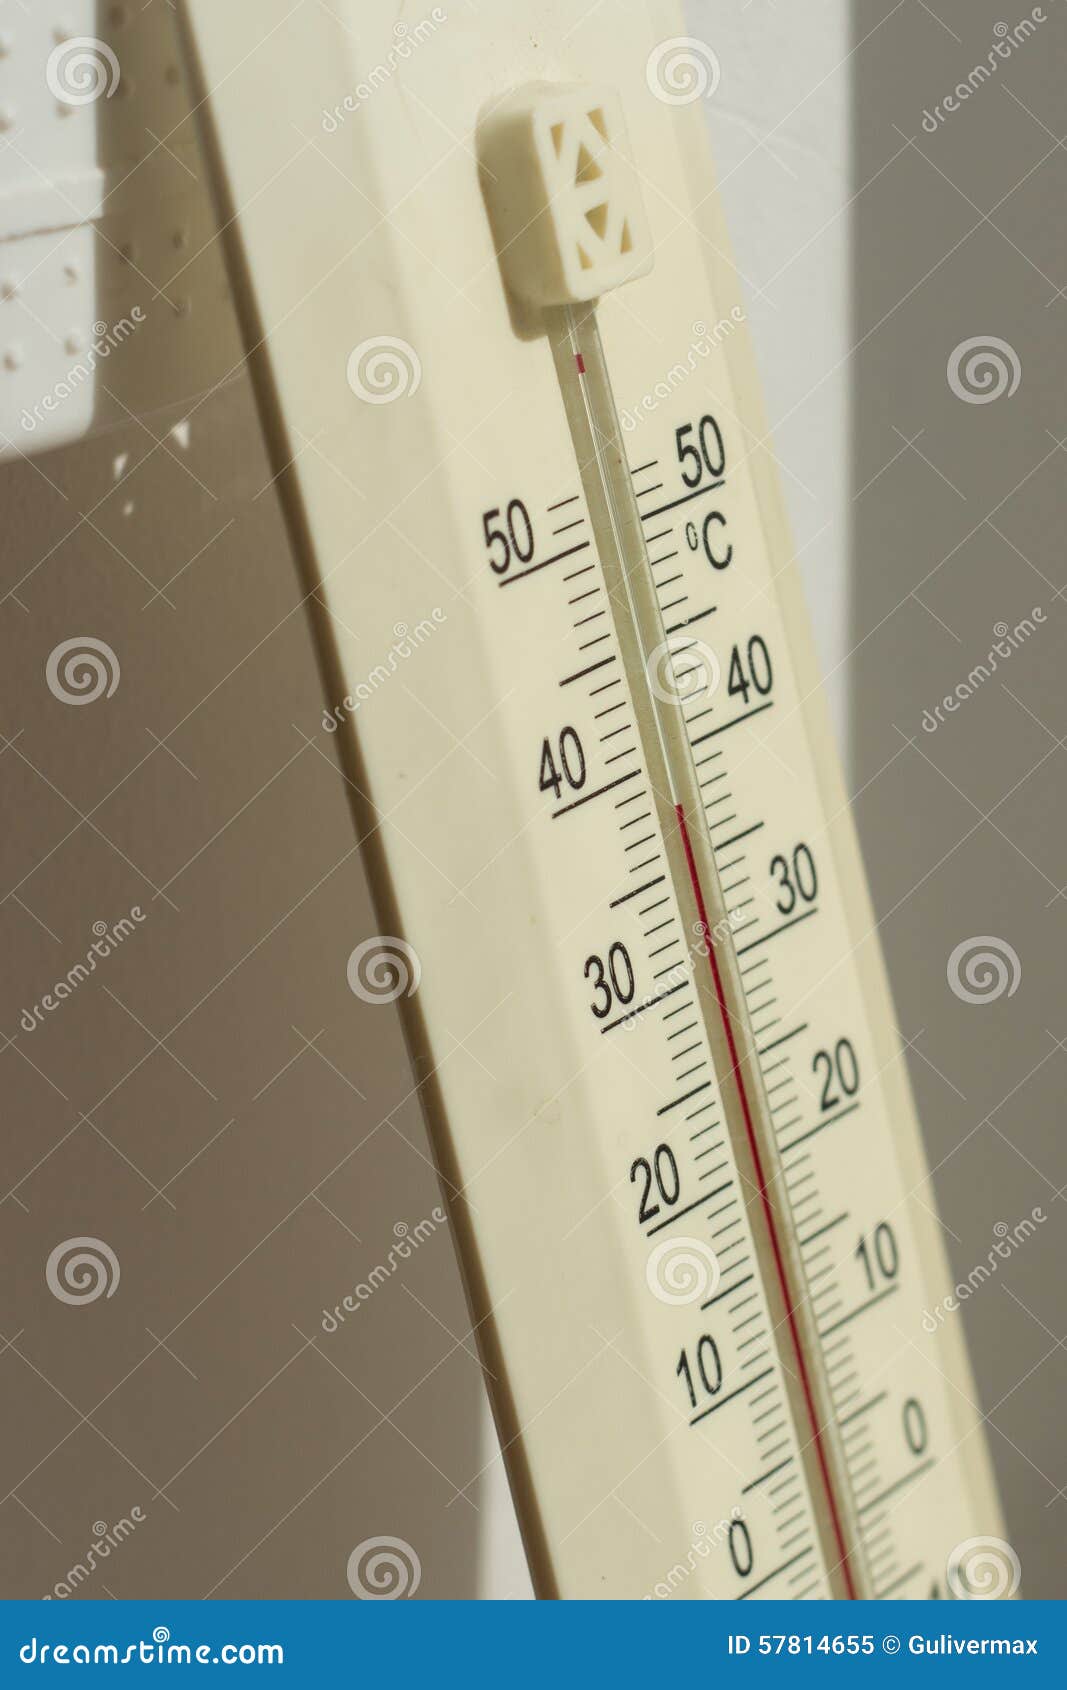 https://thumbs.dreamstime.com/z/indoor-thermometer-readings-hot-days-57814655.jpg